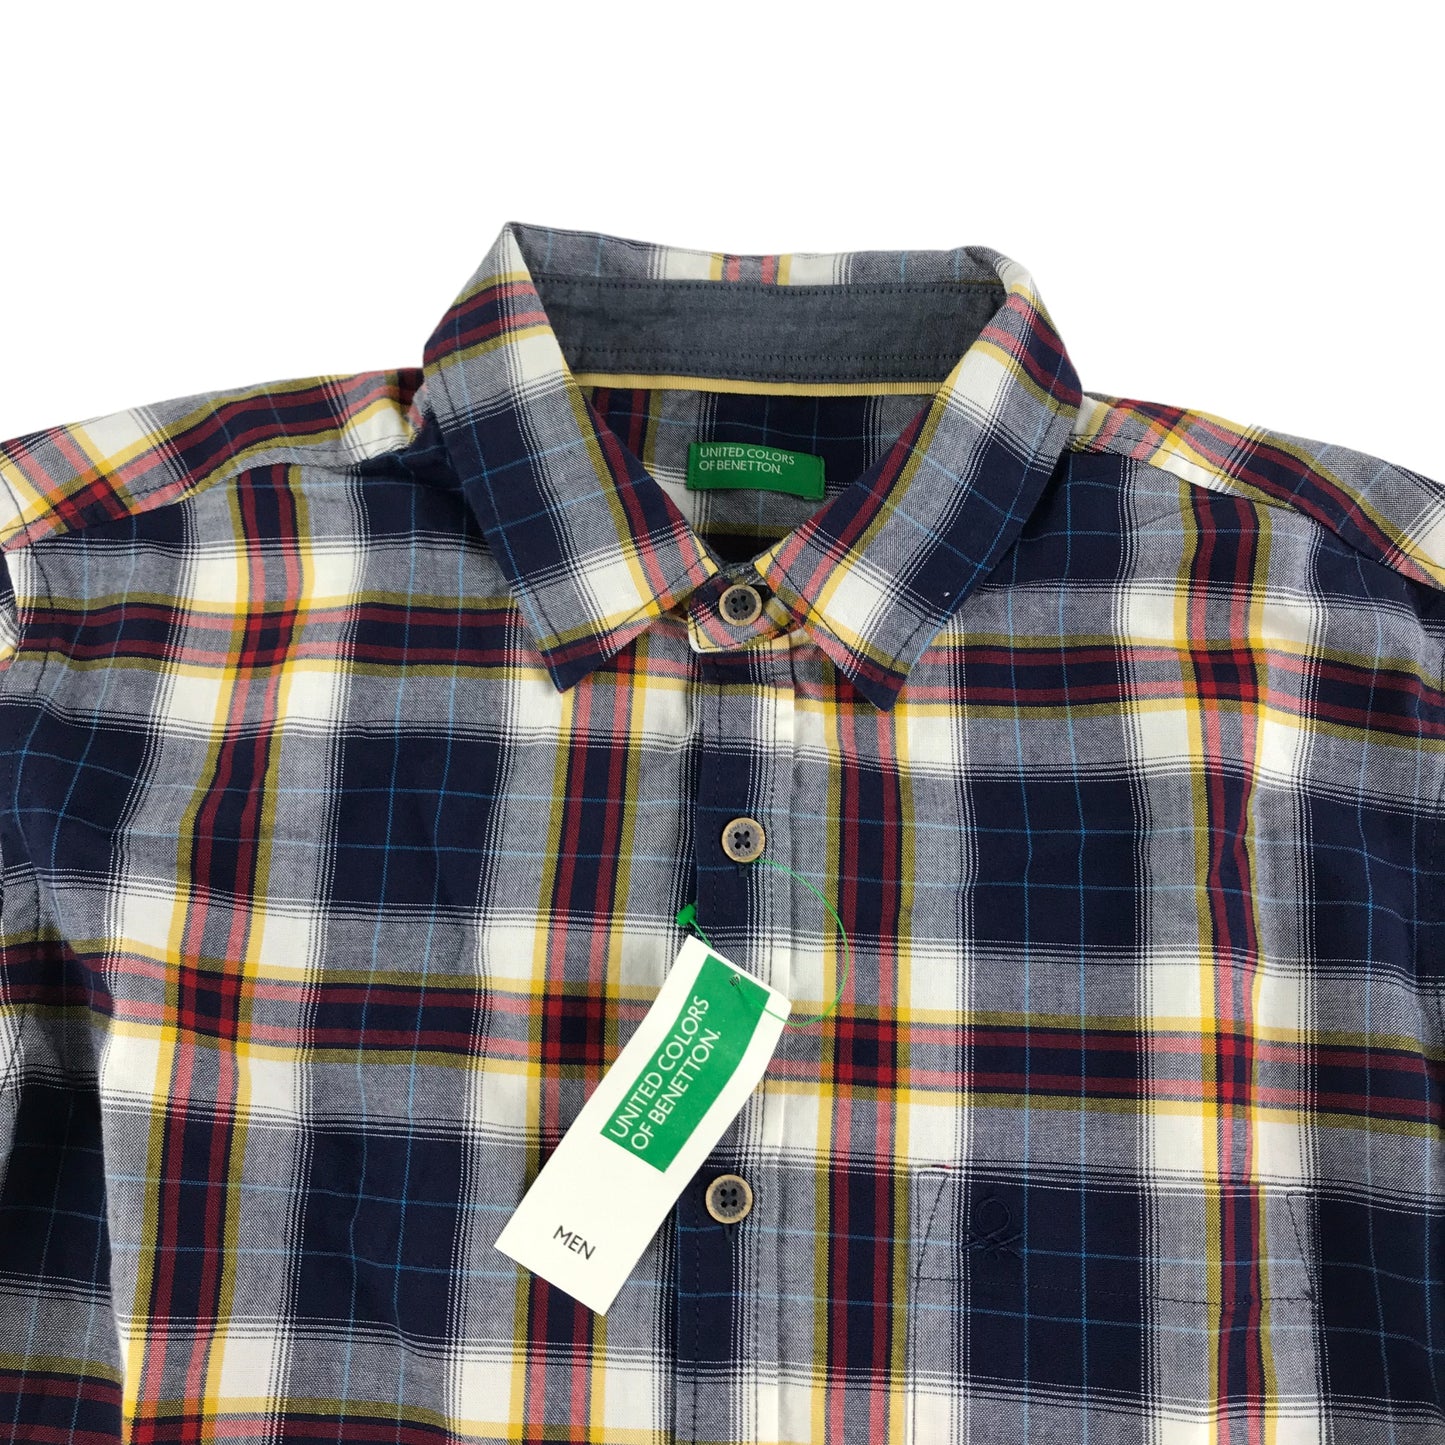 Benetton Shirt Size S Navy Burgundy Checked Long Sleeve Button Up